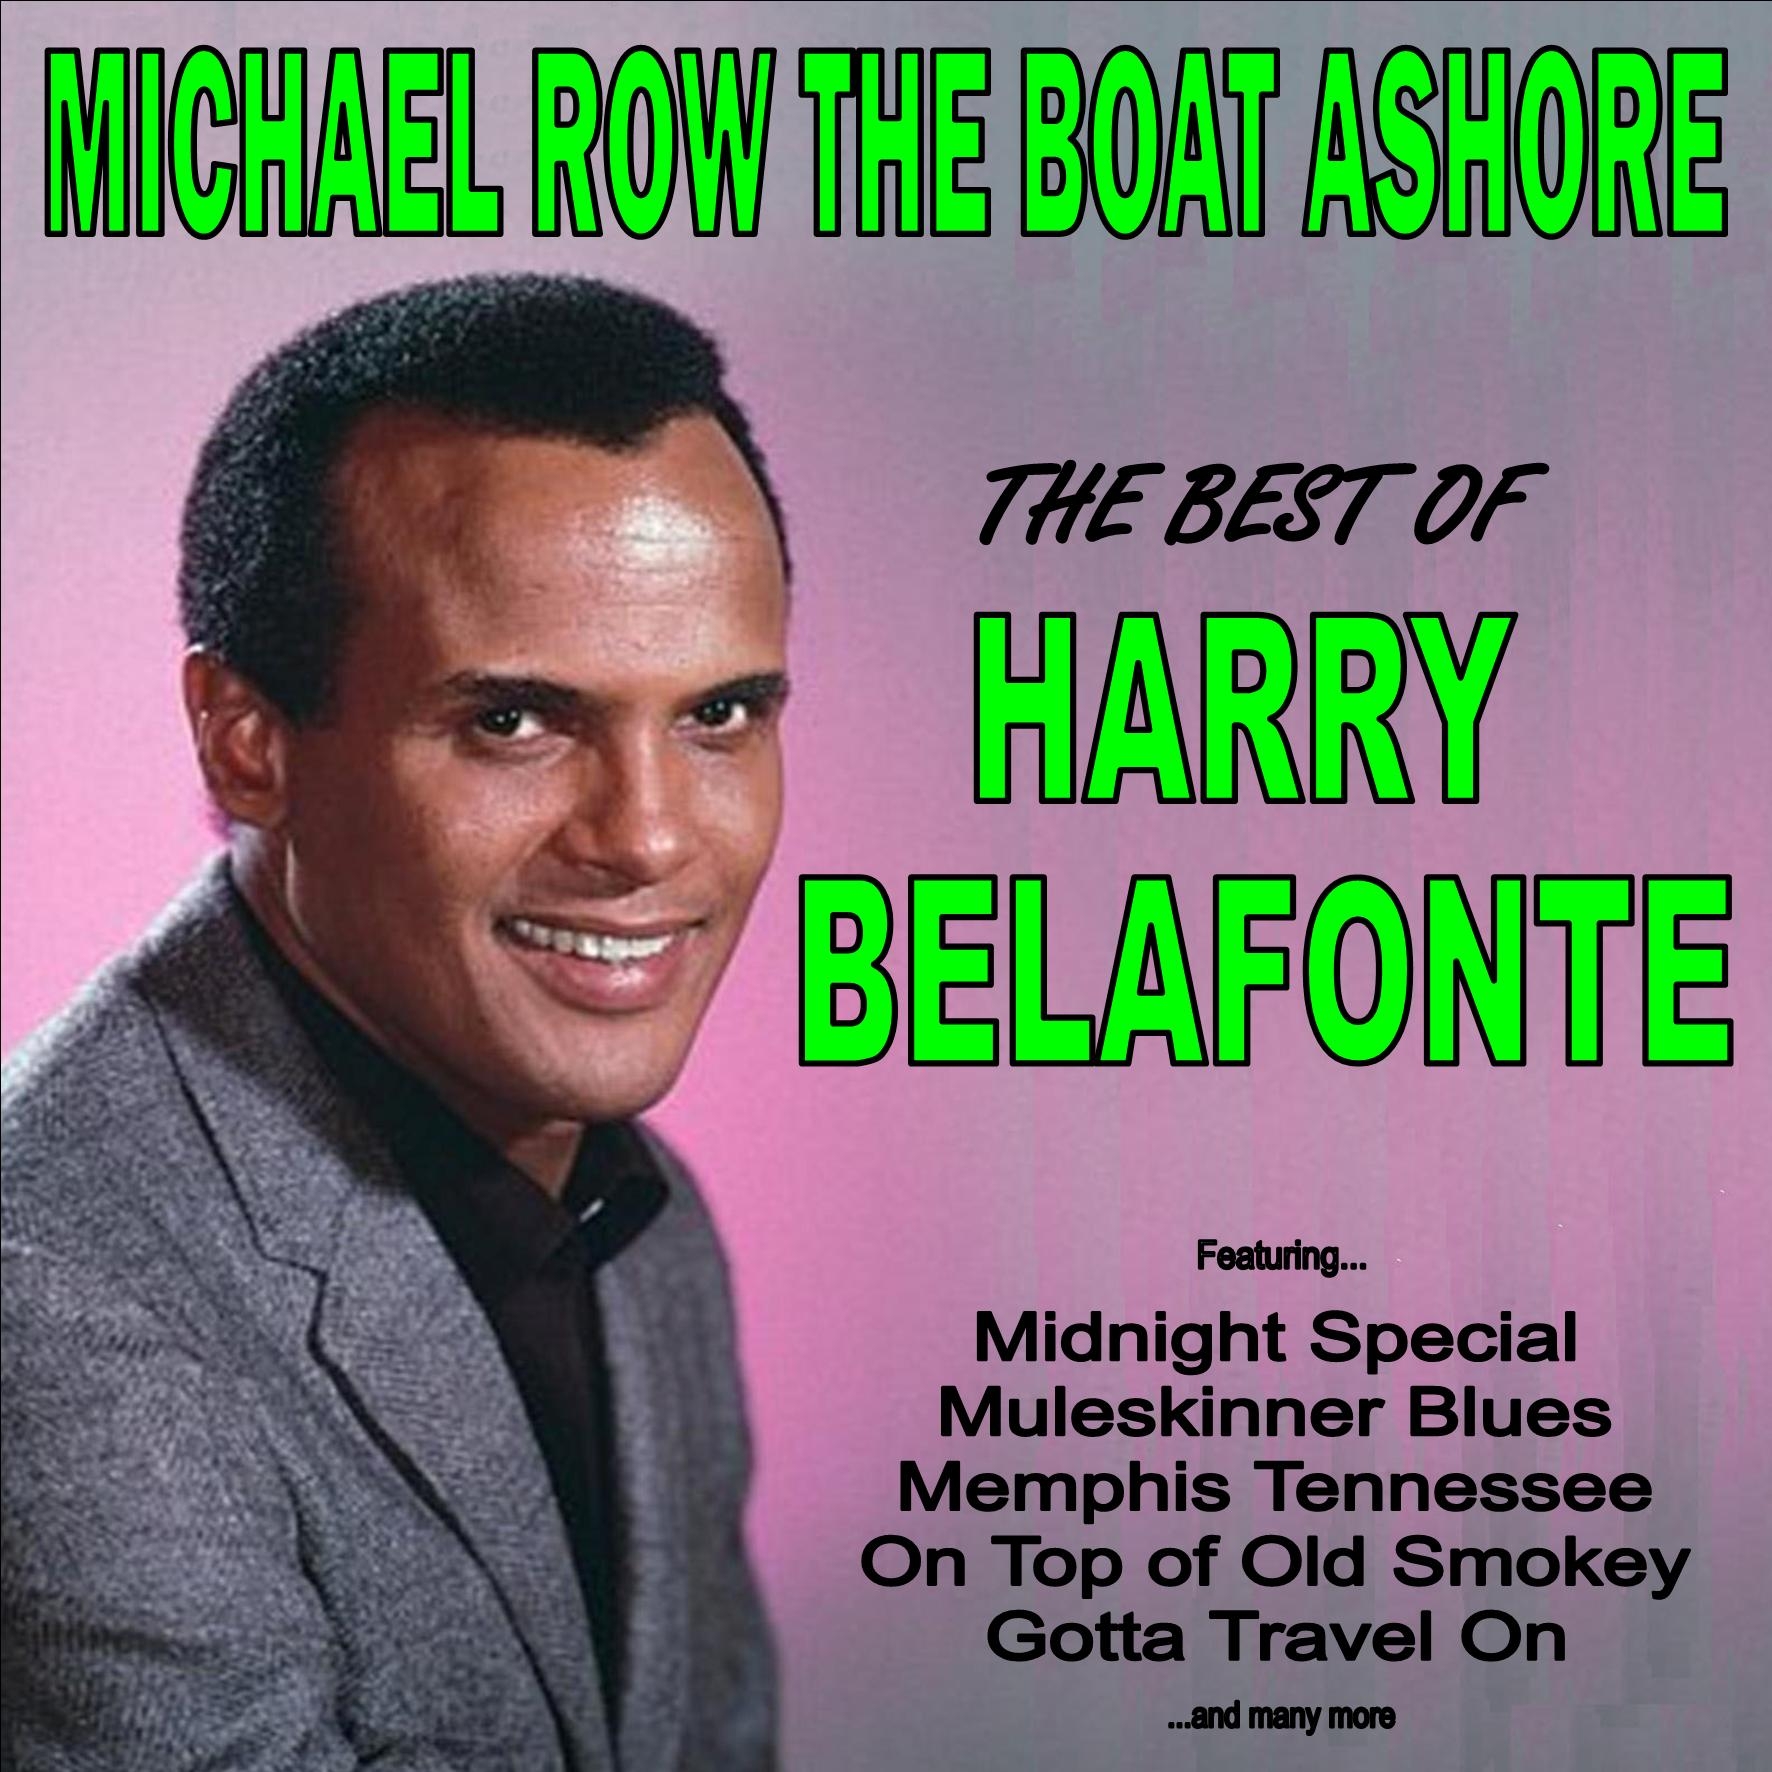 Michael Row the Boat Ashore: The Best of Harry Belafonte